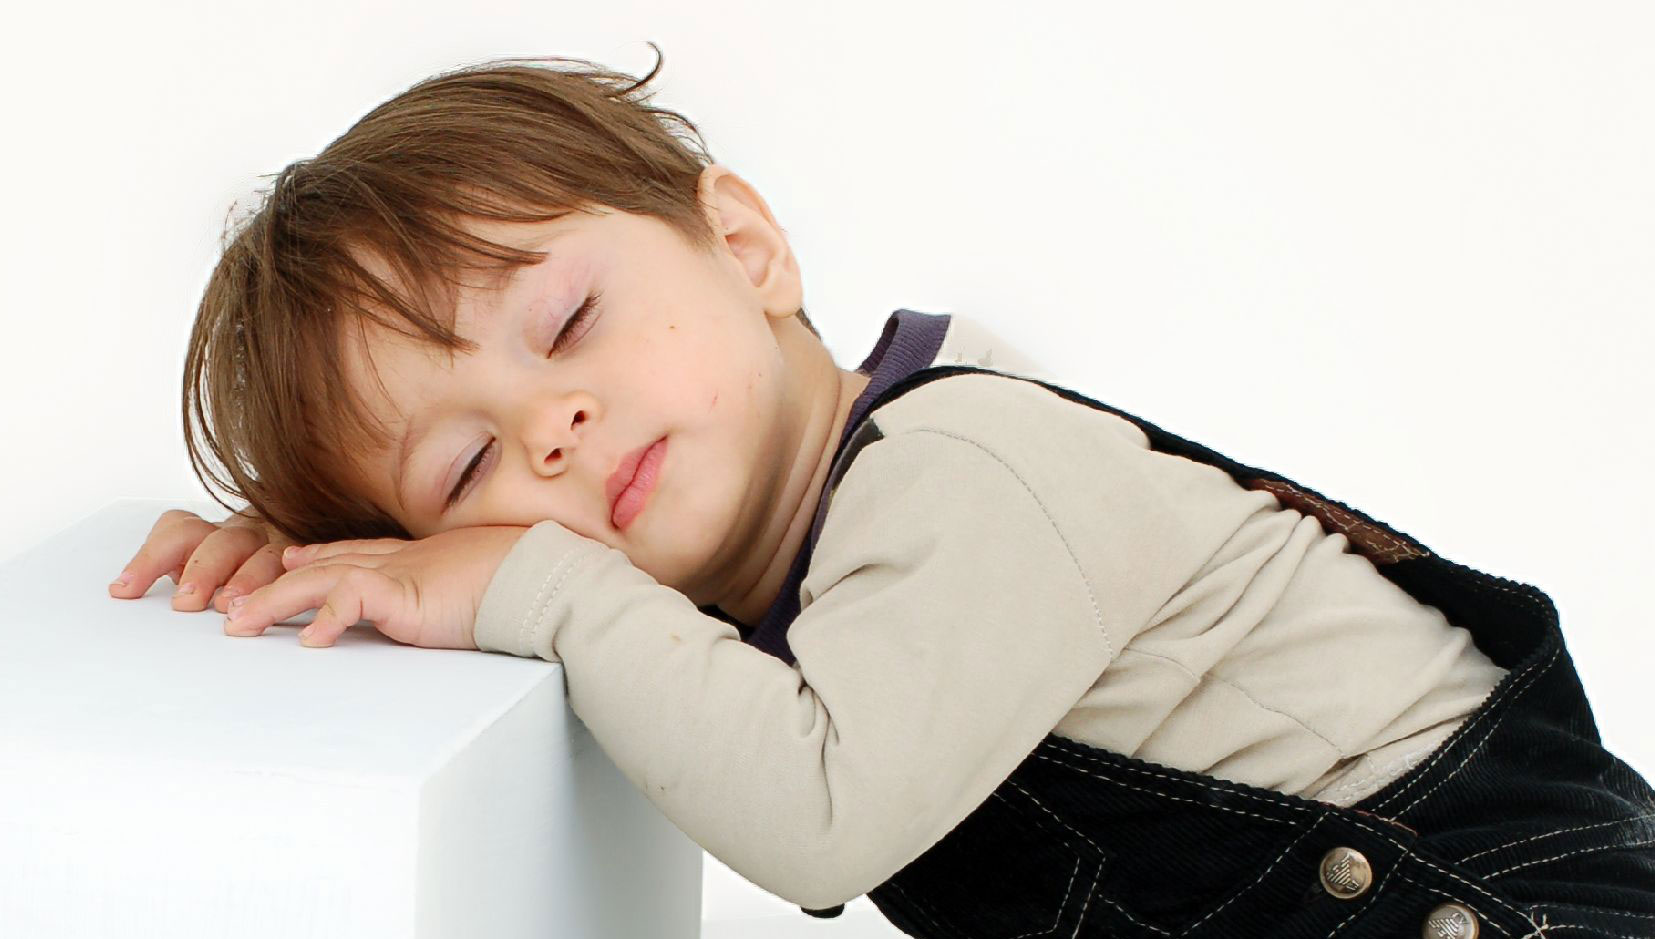 Toddler asleep while standing up with his head resting on a ledge